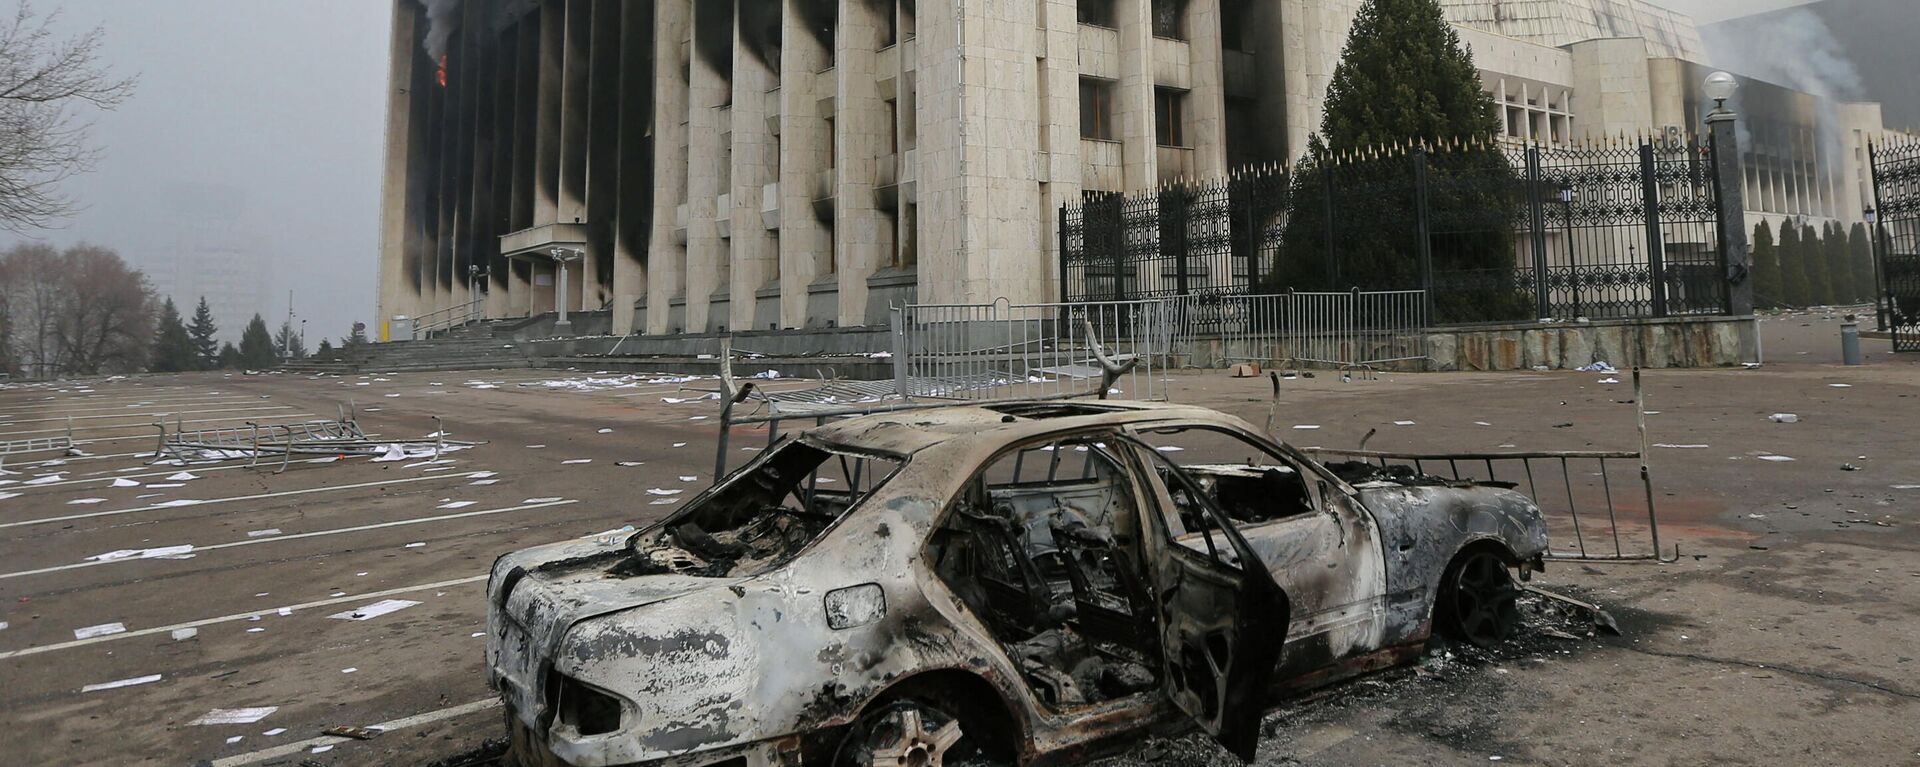 A burned car is seen in front of the mayor's office building which was torched during protests triggered by fuel price increase in Almaty, Kazakhstan January 6, 2022 - Sputnik International, 1920, 07.01.2022